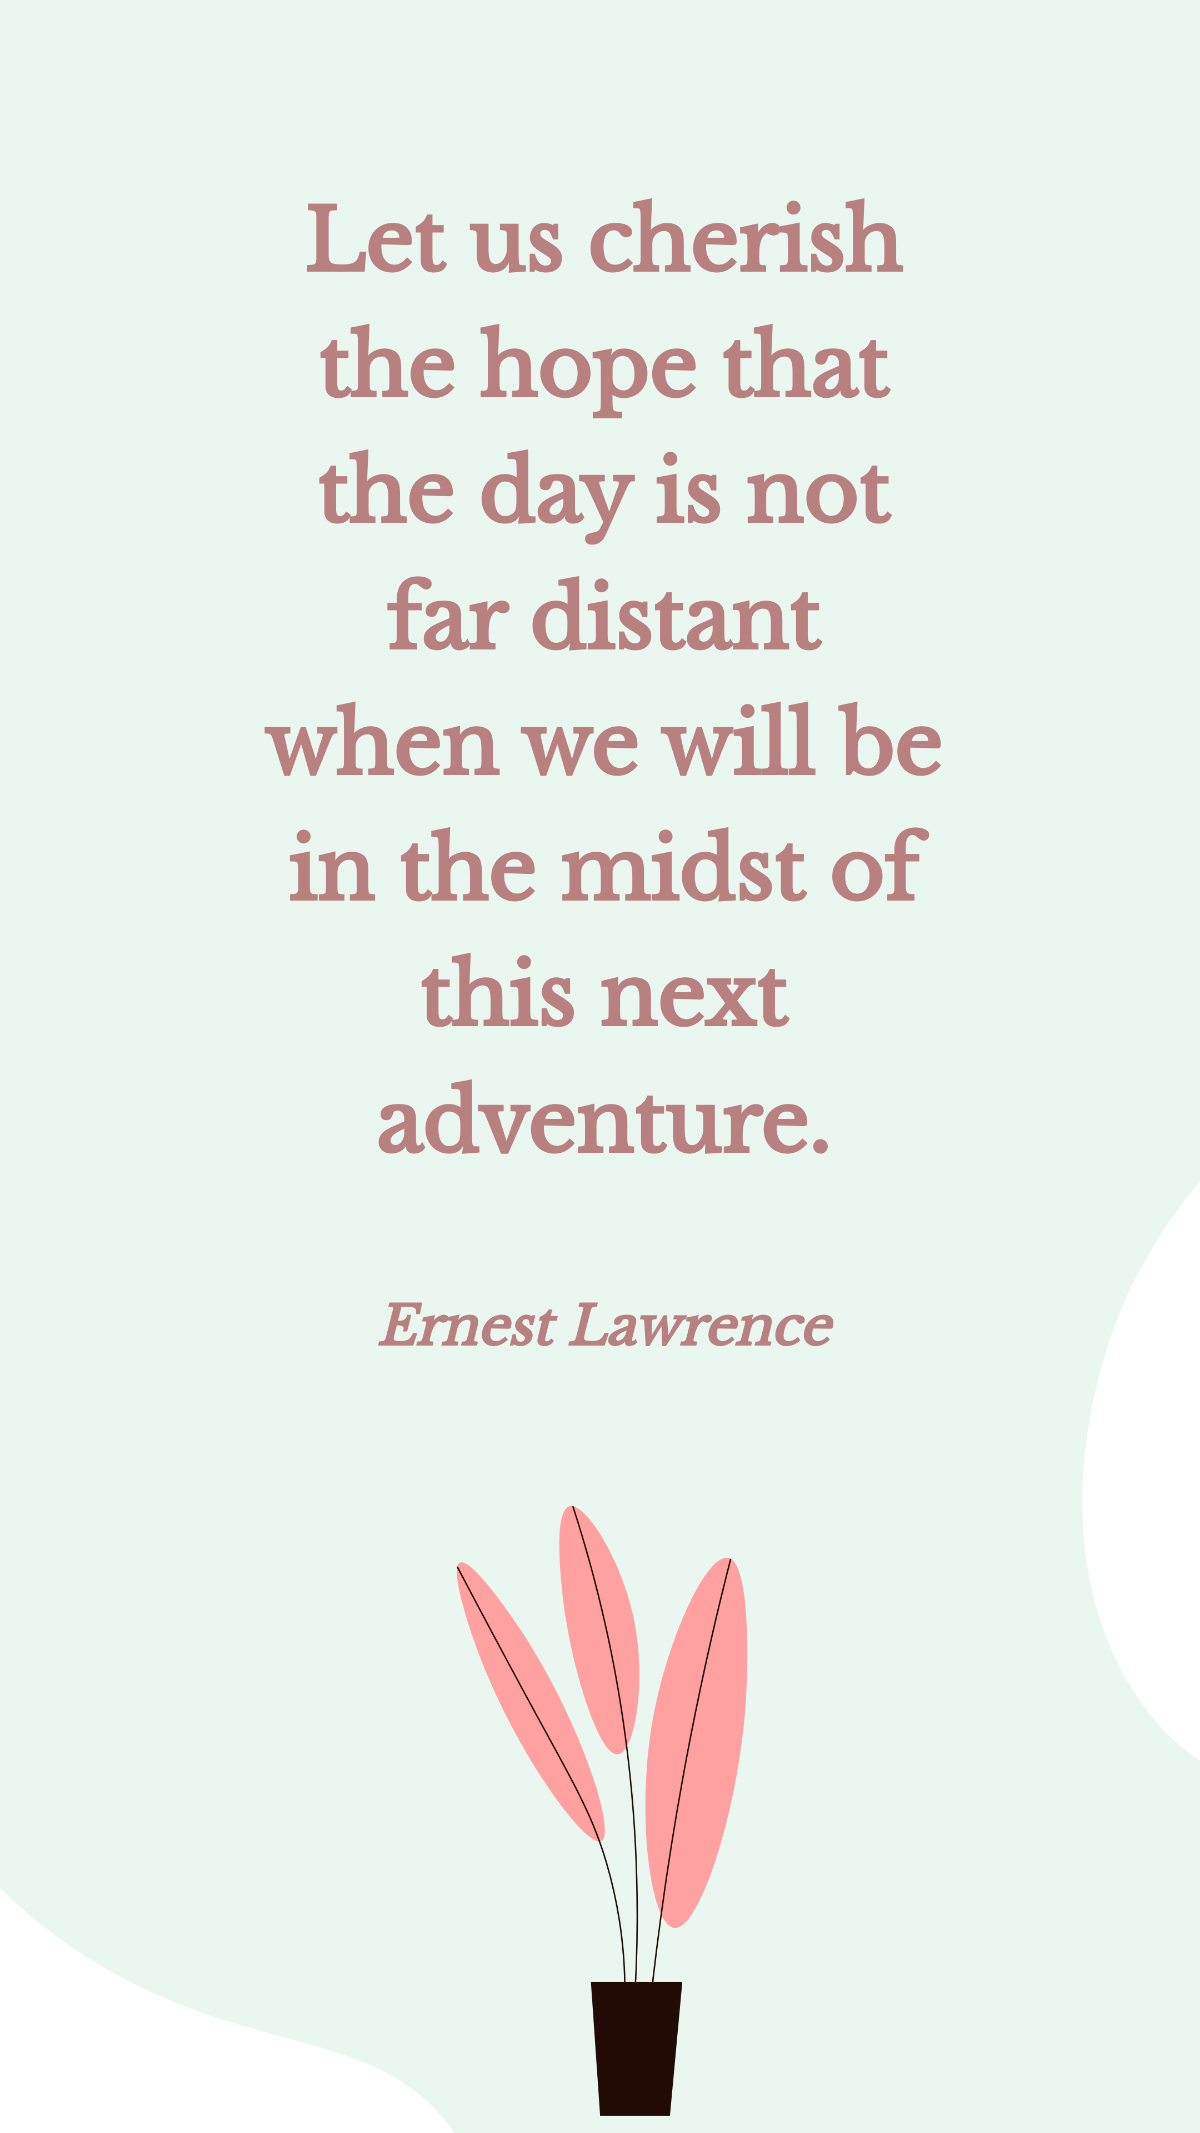 Ernest Lawrence - Let us cherish the hope that the day is not far distant when we will be in the midst of this next adventure.